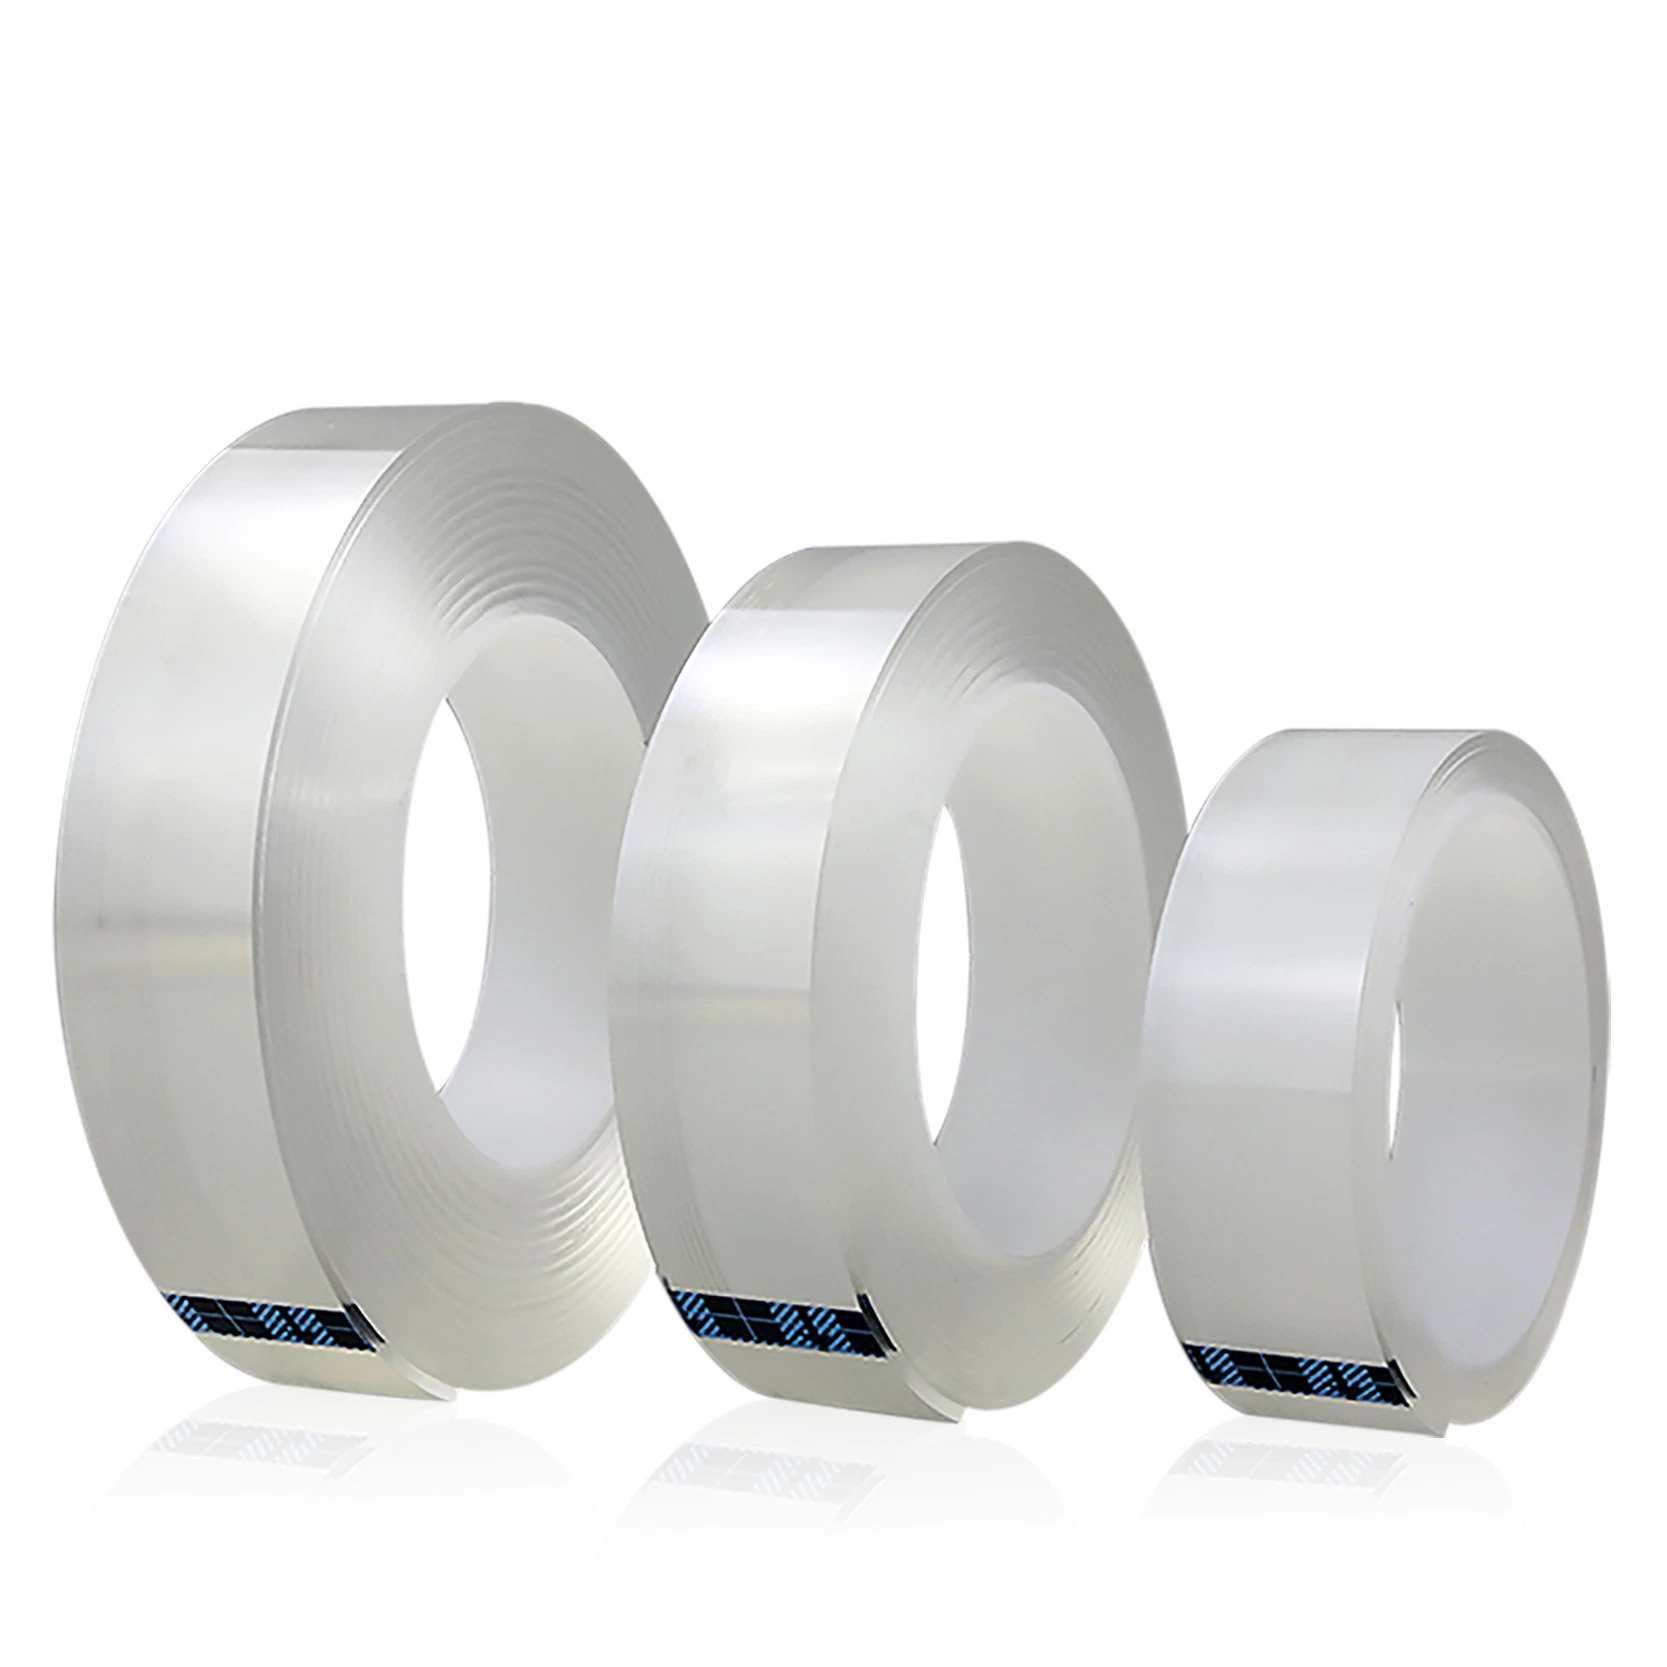 1mm*3cm*5m Double Sided Nano Tape, Heavy Duty Double Sided Adhesive Acrylic Tape, Clear Mounting Tape, Removable&Reusable Tape-Clear Nano Tape Packed in OPP Bag